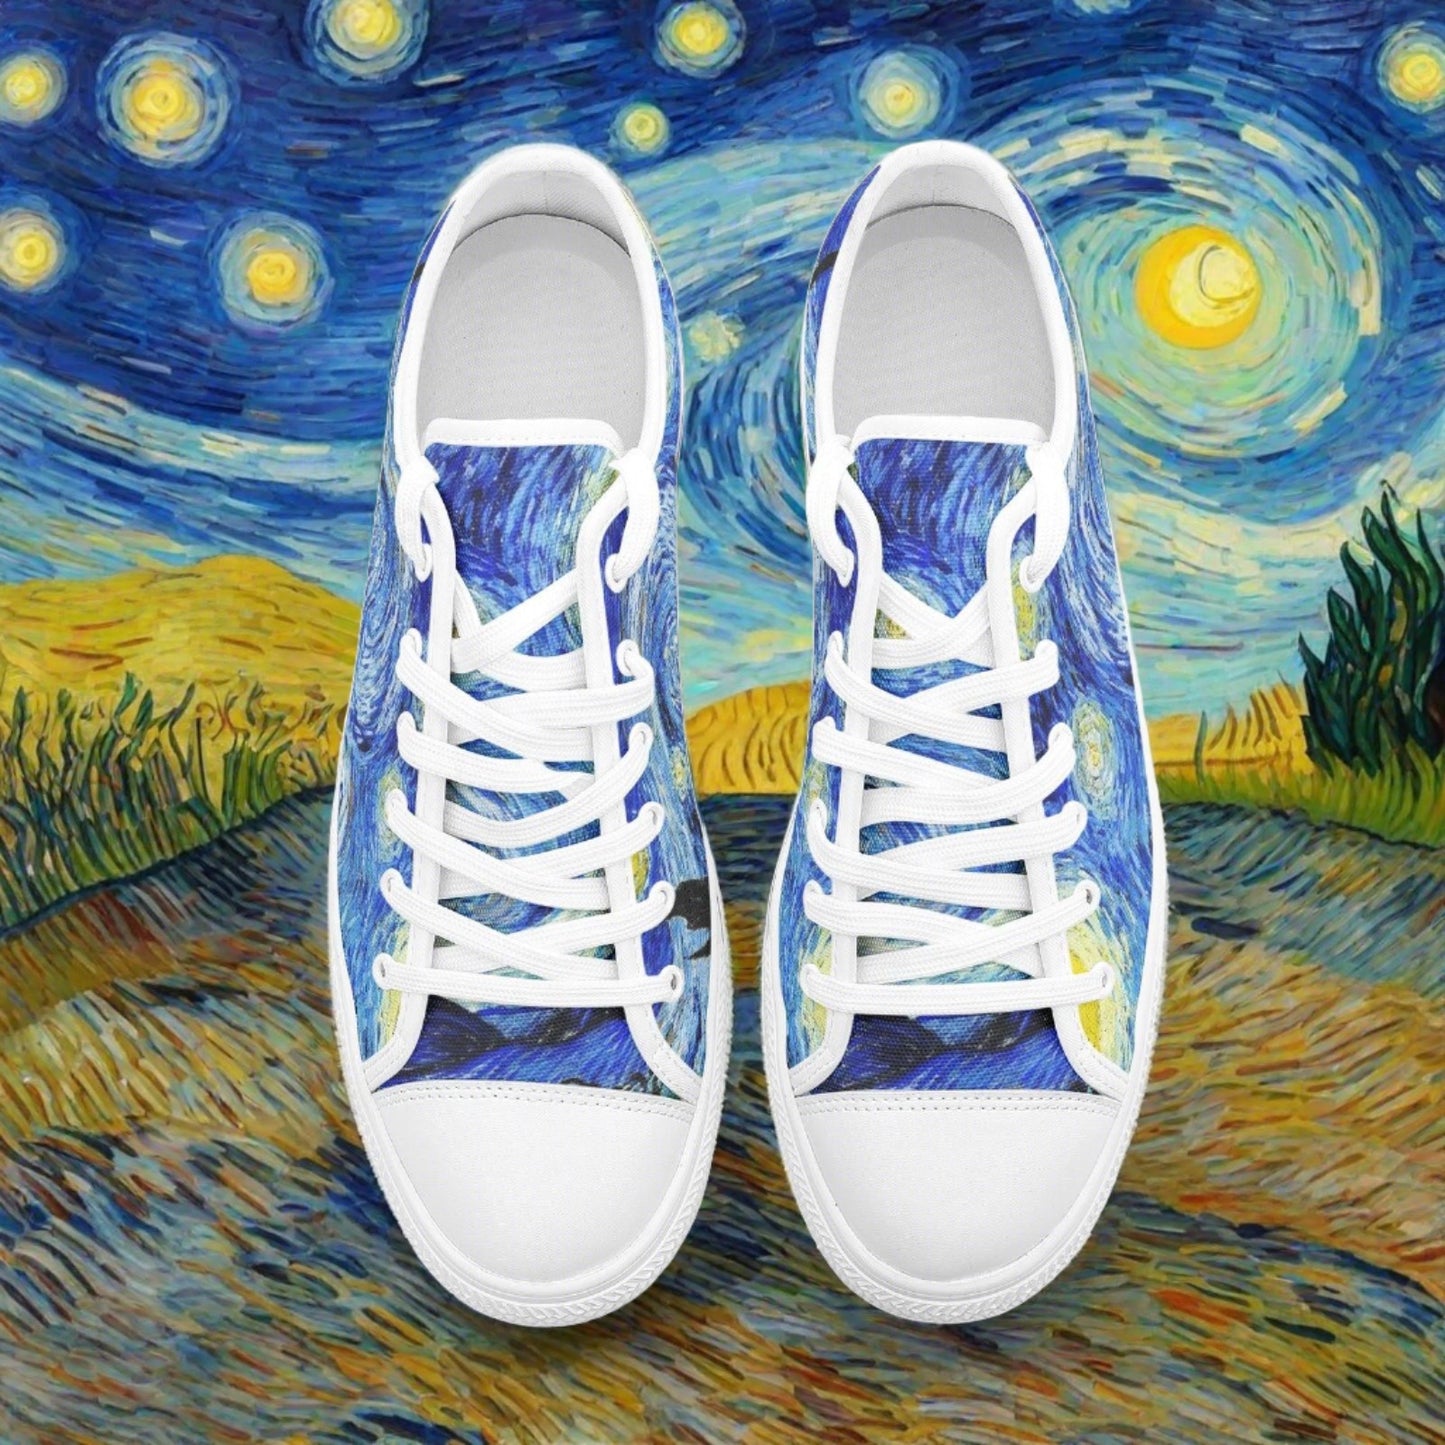 "Starry Night" by Vincent Van Gogh